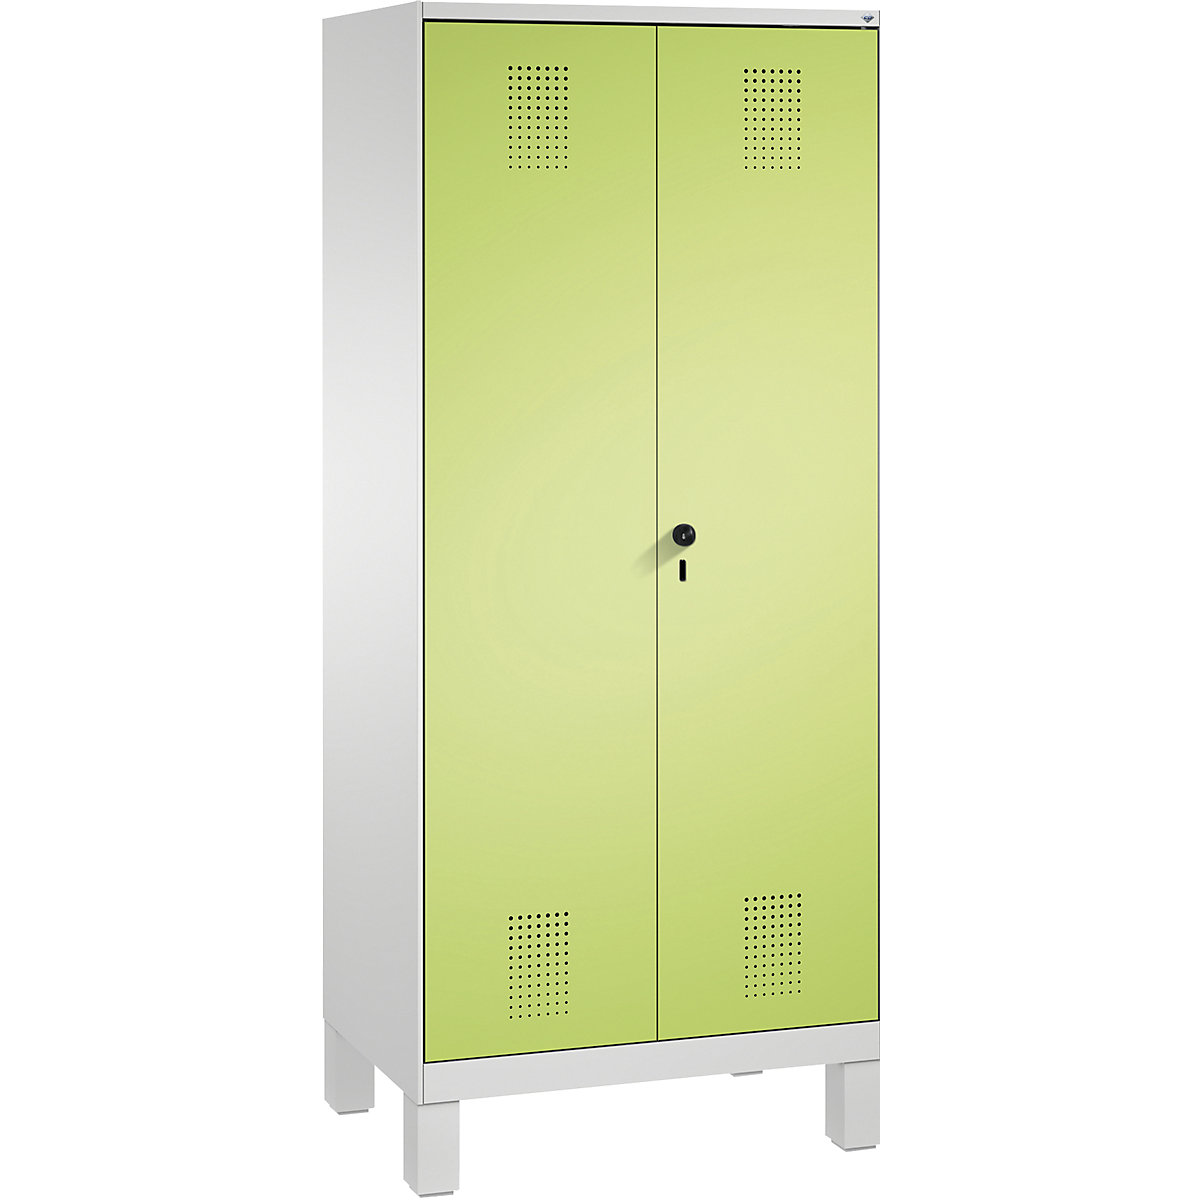 EVOLO storage cupboard, doors close in the middle, with feet – C+P, 2 compartments, 8 shelves, compartment width 400 mm, light grey / viridian green-9